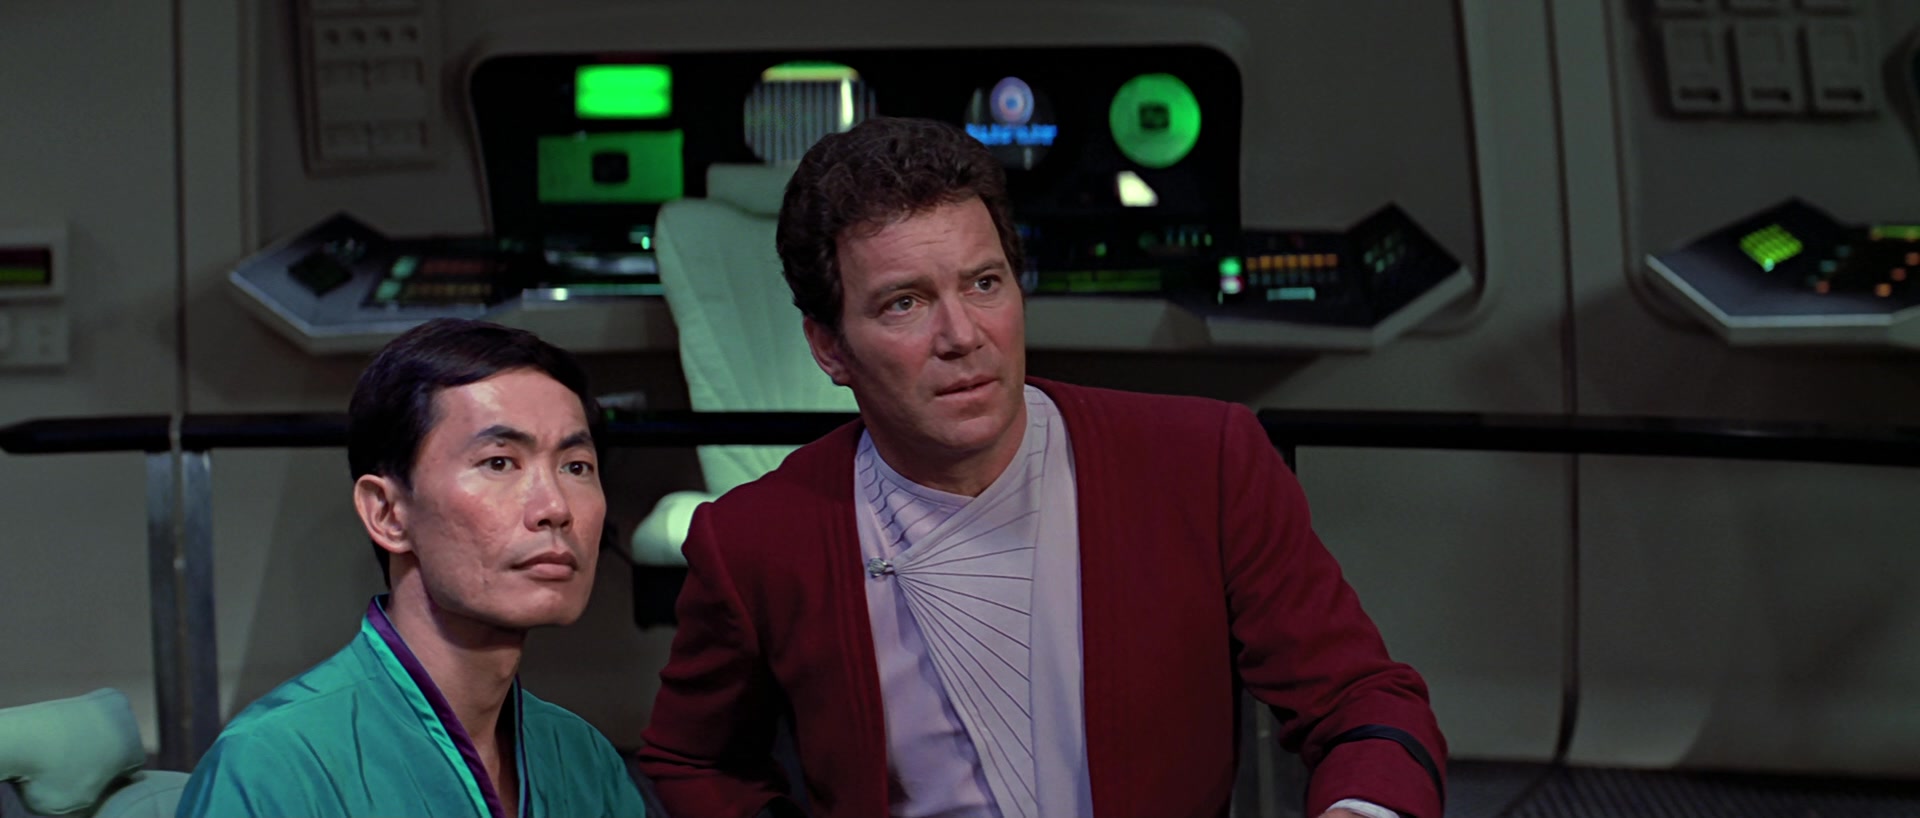 Kirk (William Shatner) and Sulu (George Takei) find themselves in a standoff with the Klingon commander Kruge (Christopher Lloyd) in Star Trek III: The Search for Spock (198), Paramount Pictures